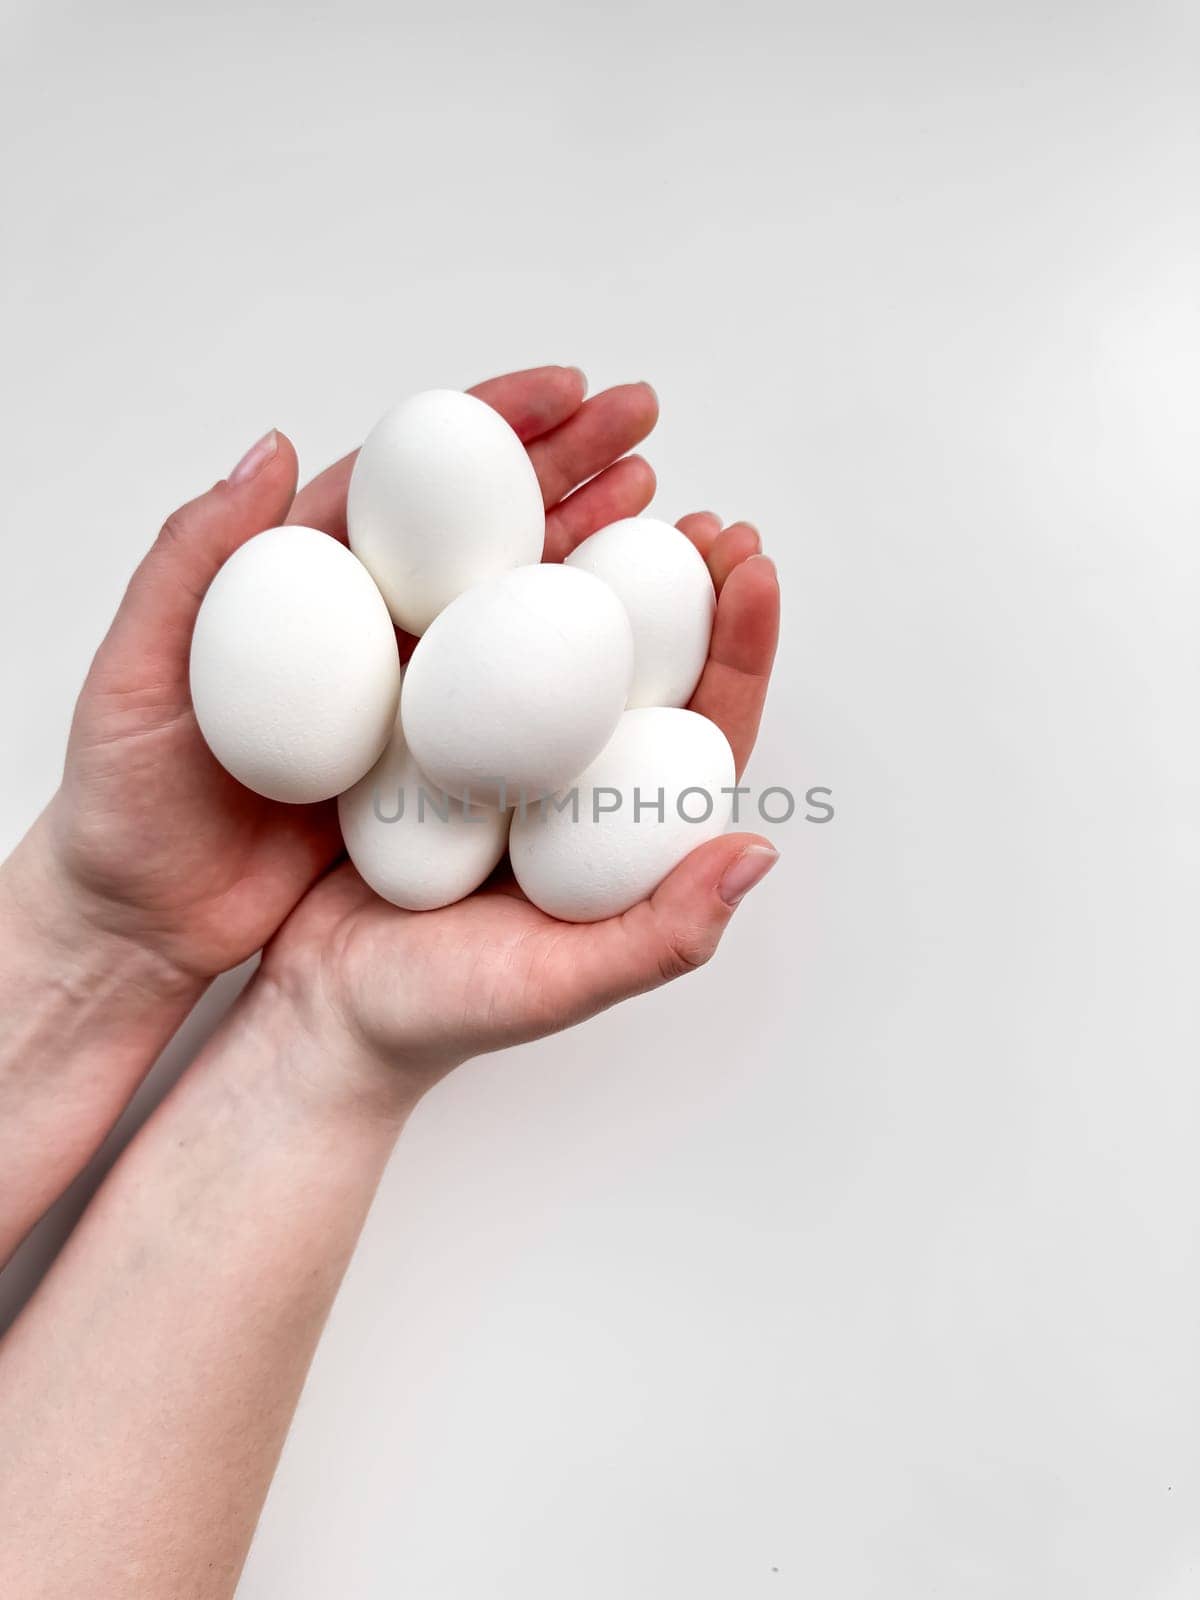 Hands cradling a cluster of white eggs against pale background, a symbol of care, nourishment, and new beginnings with ample copy space. For culinary websites, recipe blogs, and nutritional guides. High quality photo